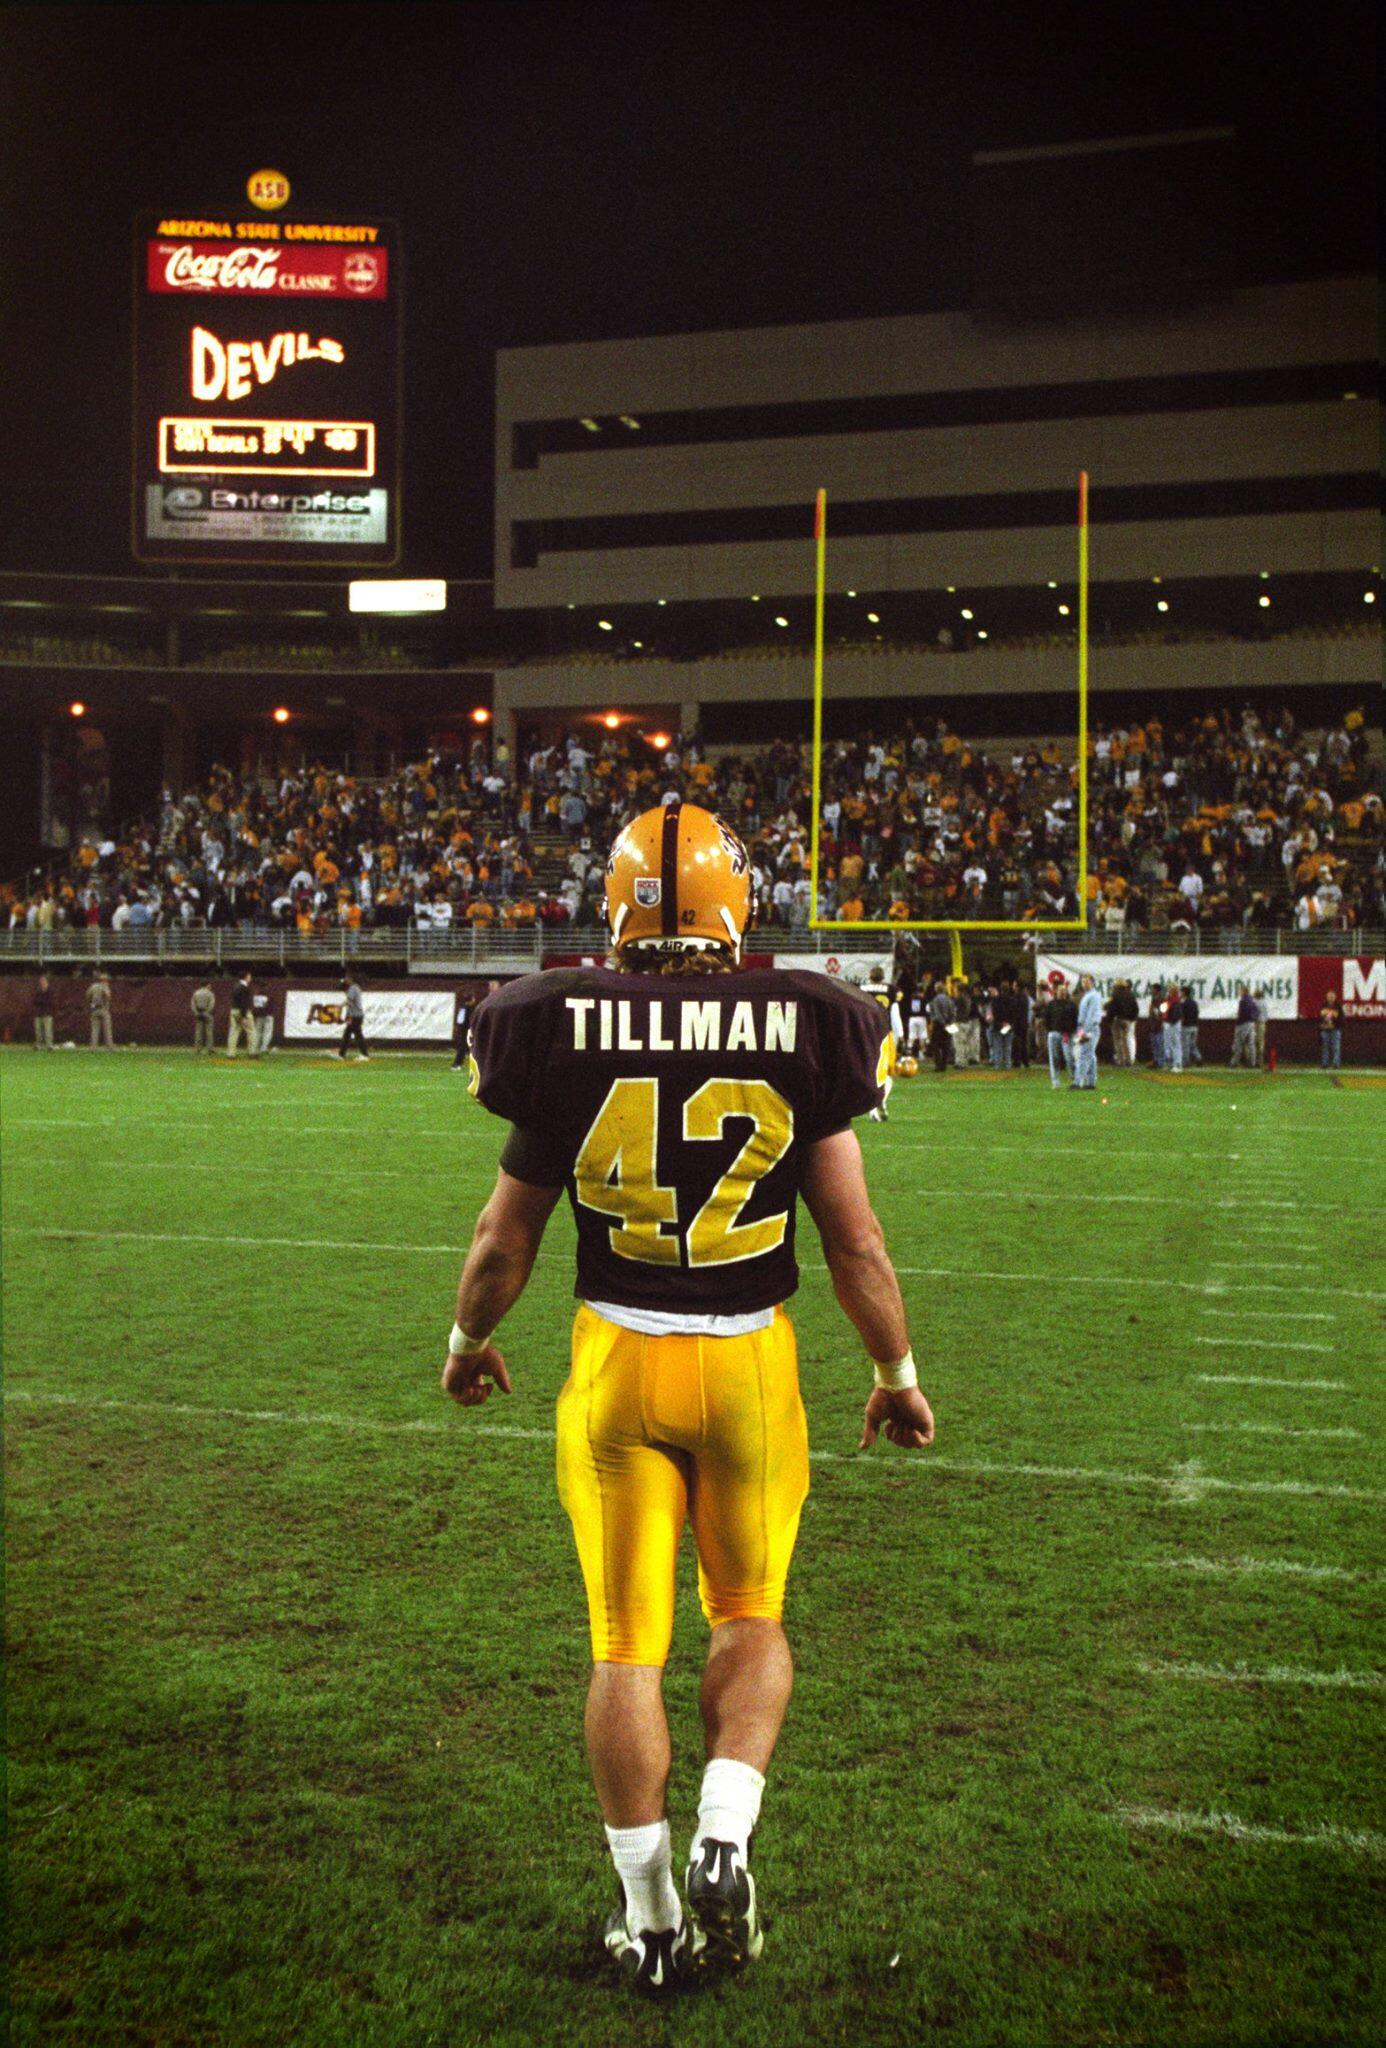 Pat Tillman Fnd on X: The 226th overall pick (7th Round) of the